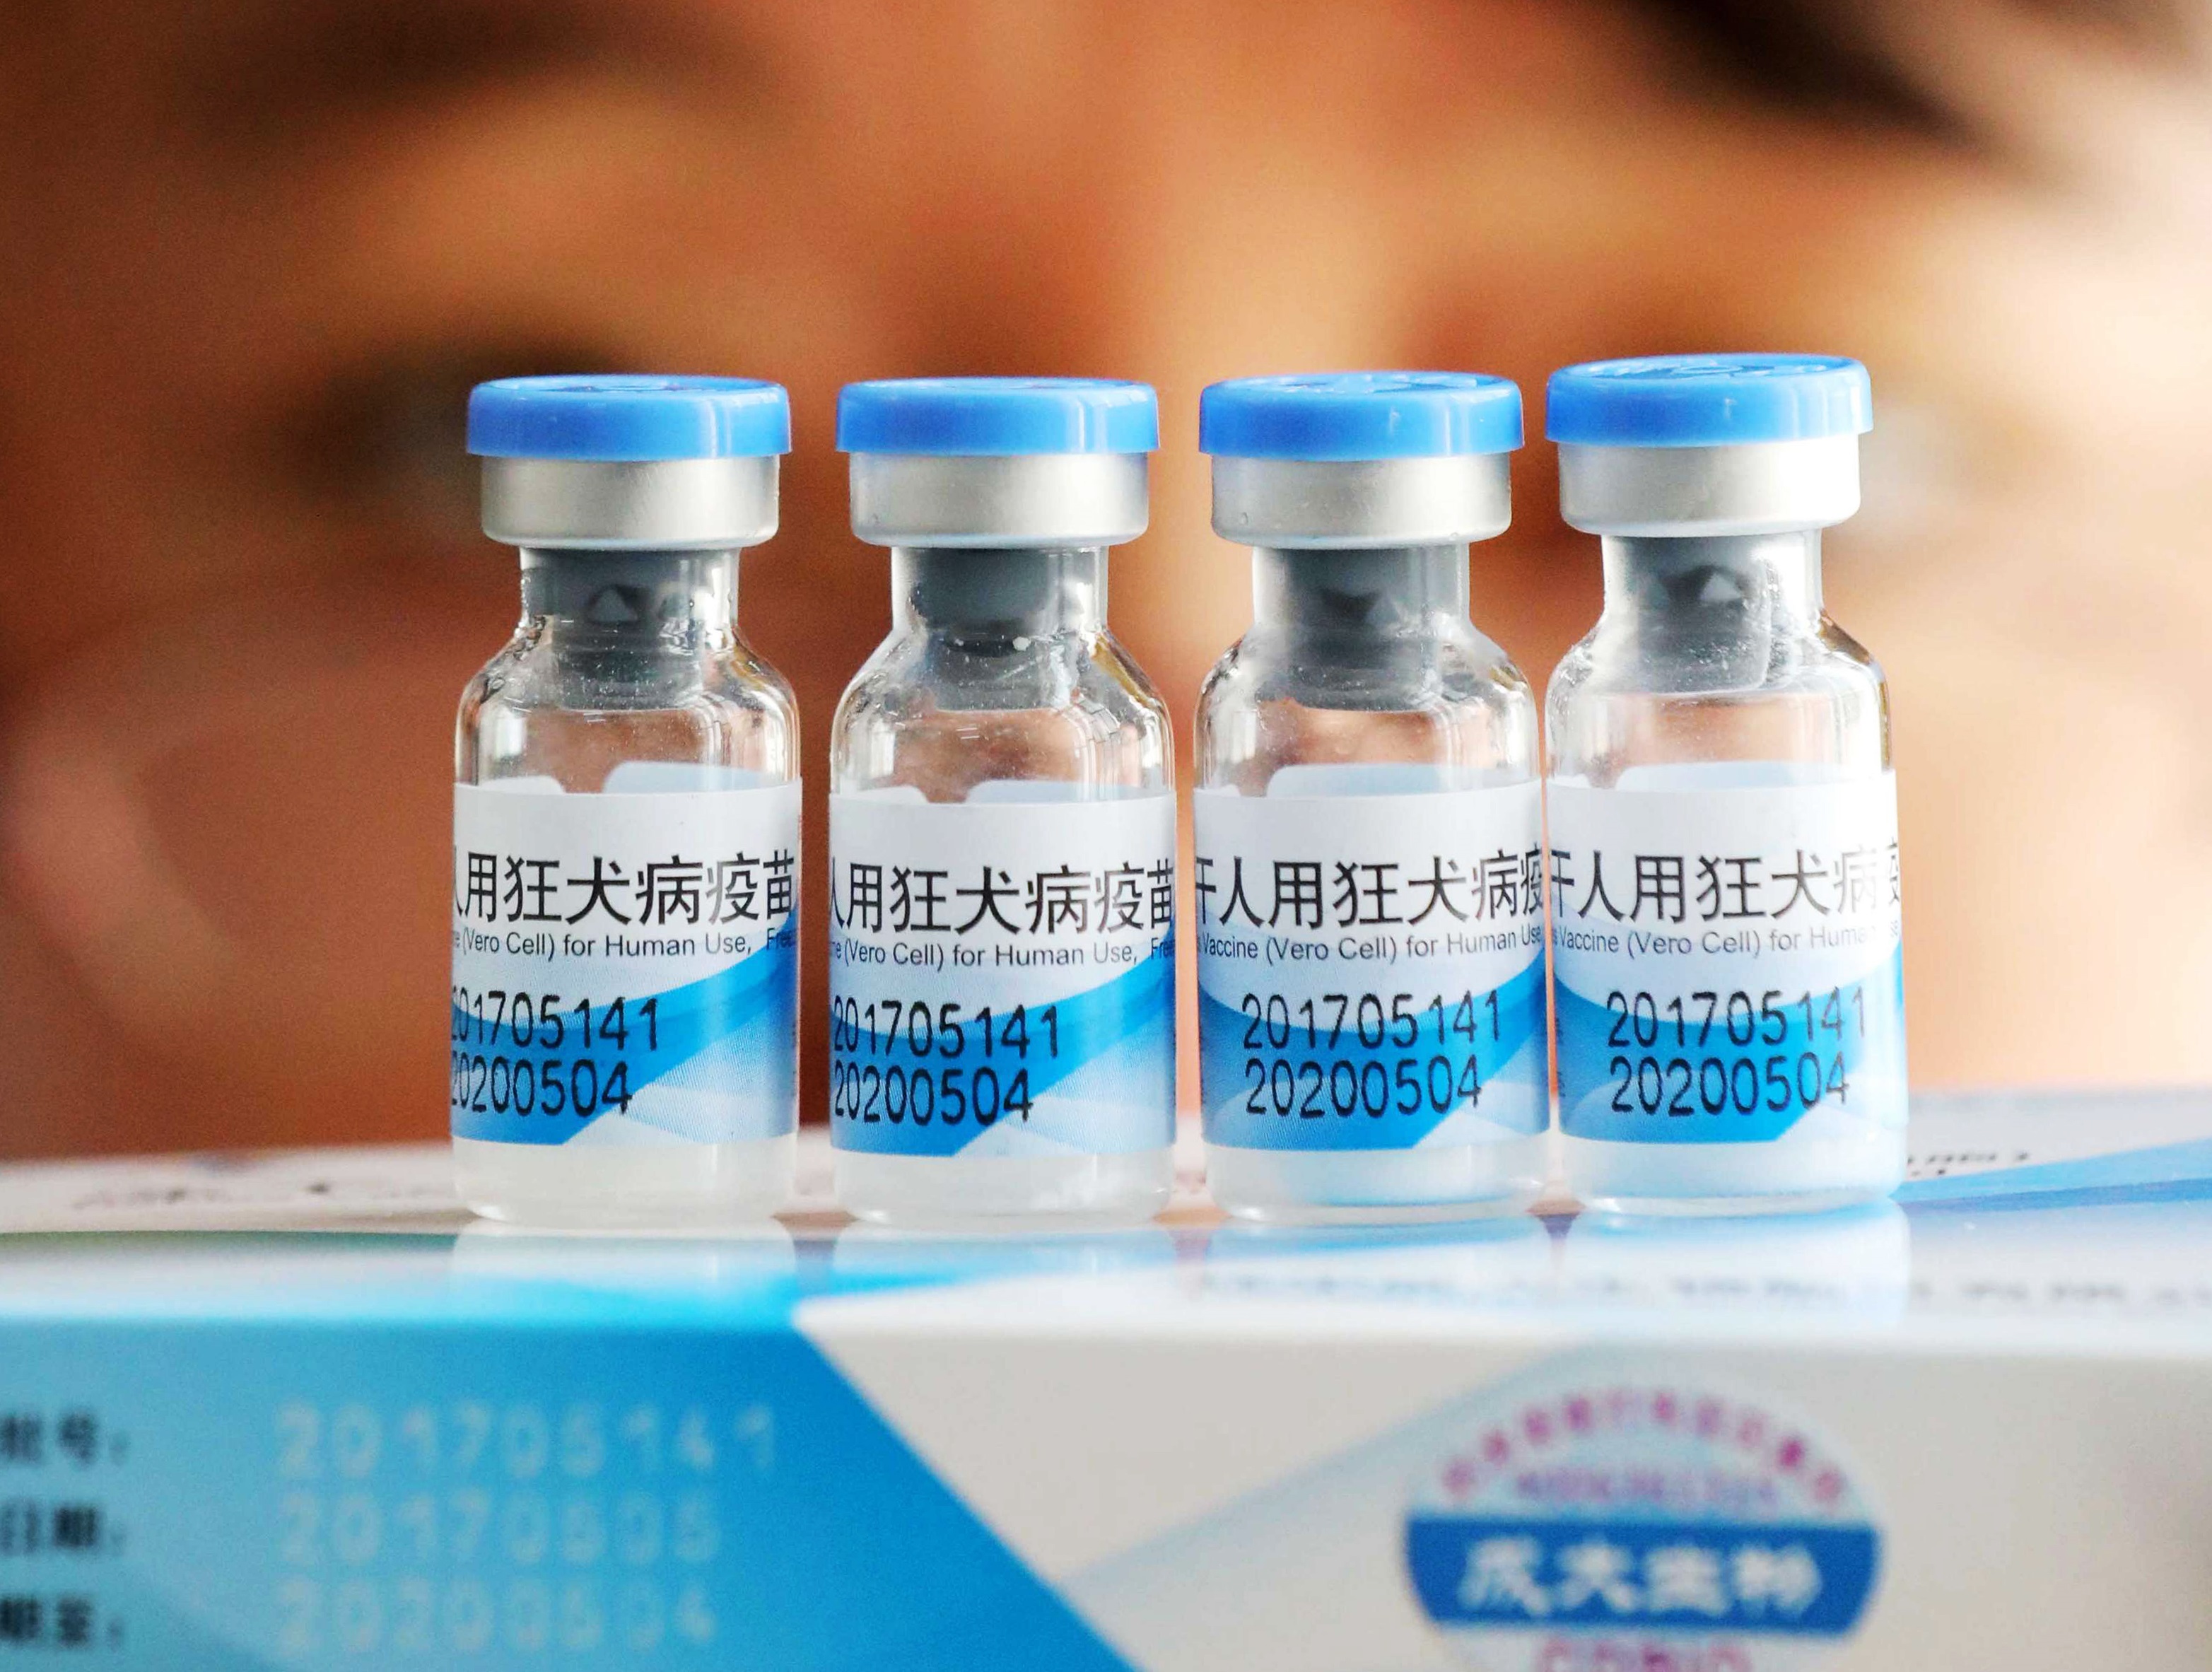 Fake rabies vaccine gets 80 China execs in trouble